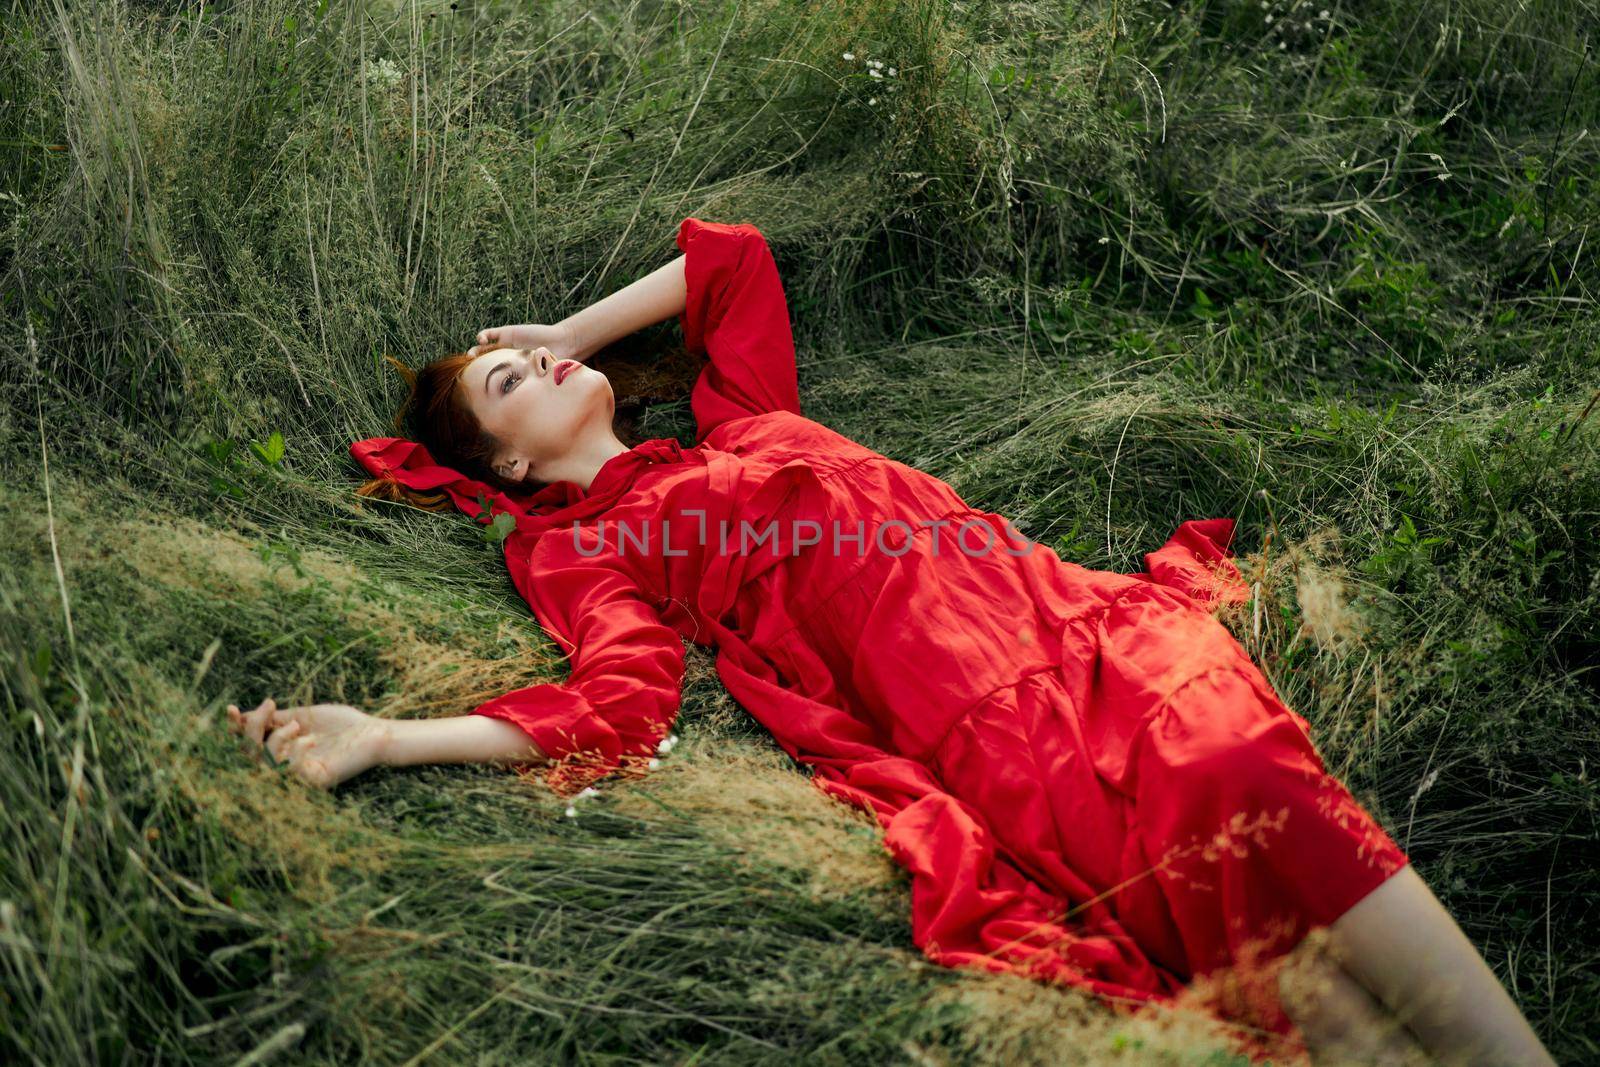 woman in red dress lies on the grass in the field nature landscape. High quality photo